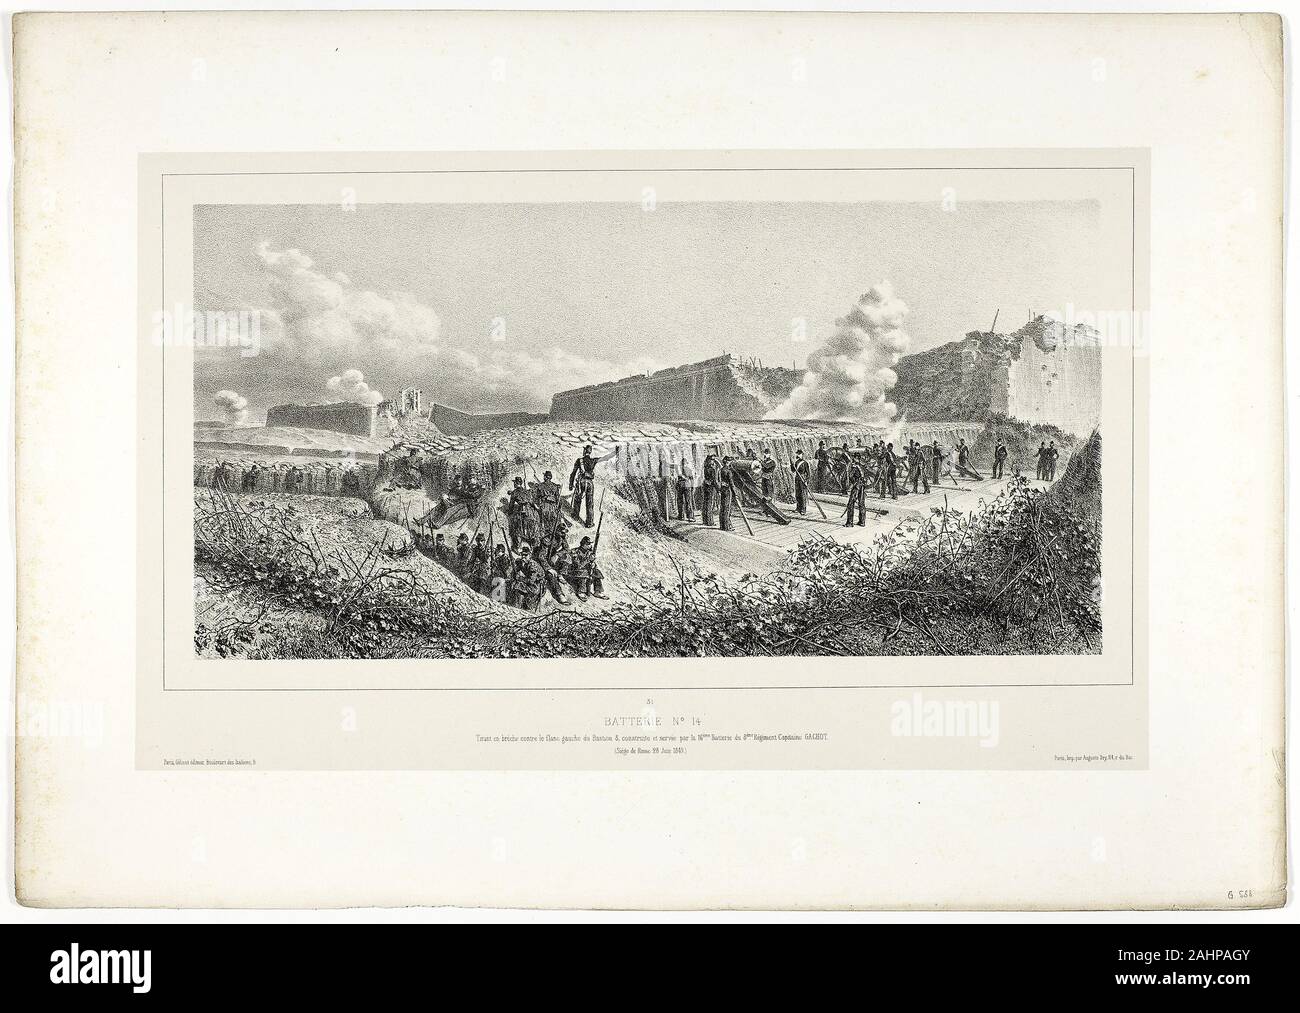 Denis Auguste Marie Raffet. Battery no.14, from Souvenirs d’Italie Expédition de Rome. 1859. France. Lithograph in black on warm ivory wove chine laid down on off-white wove paper Stock Photo